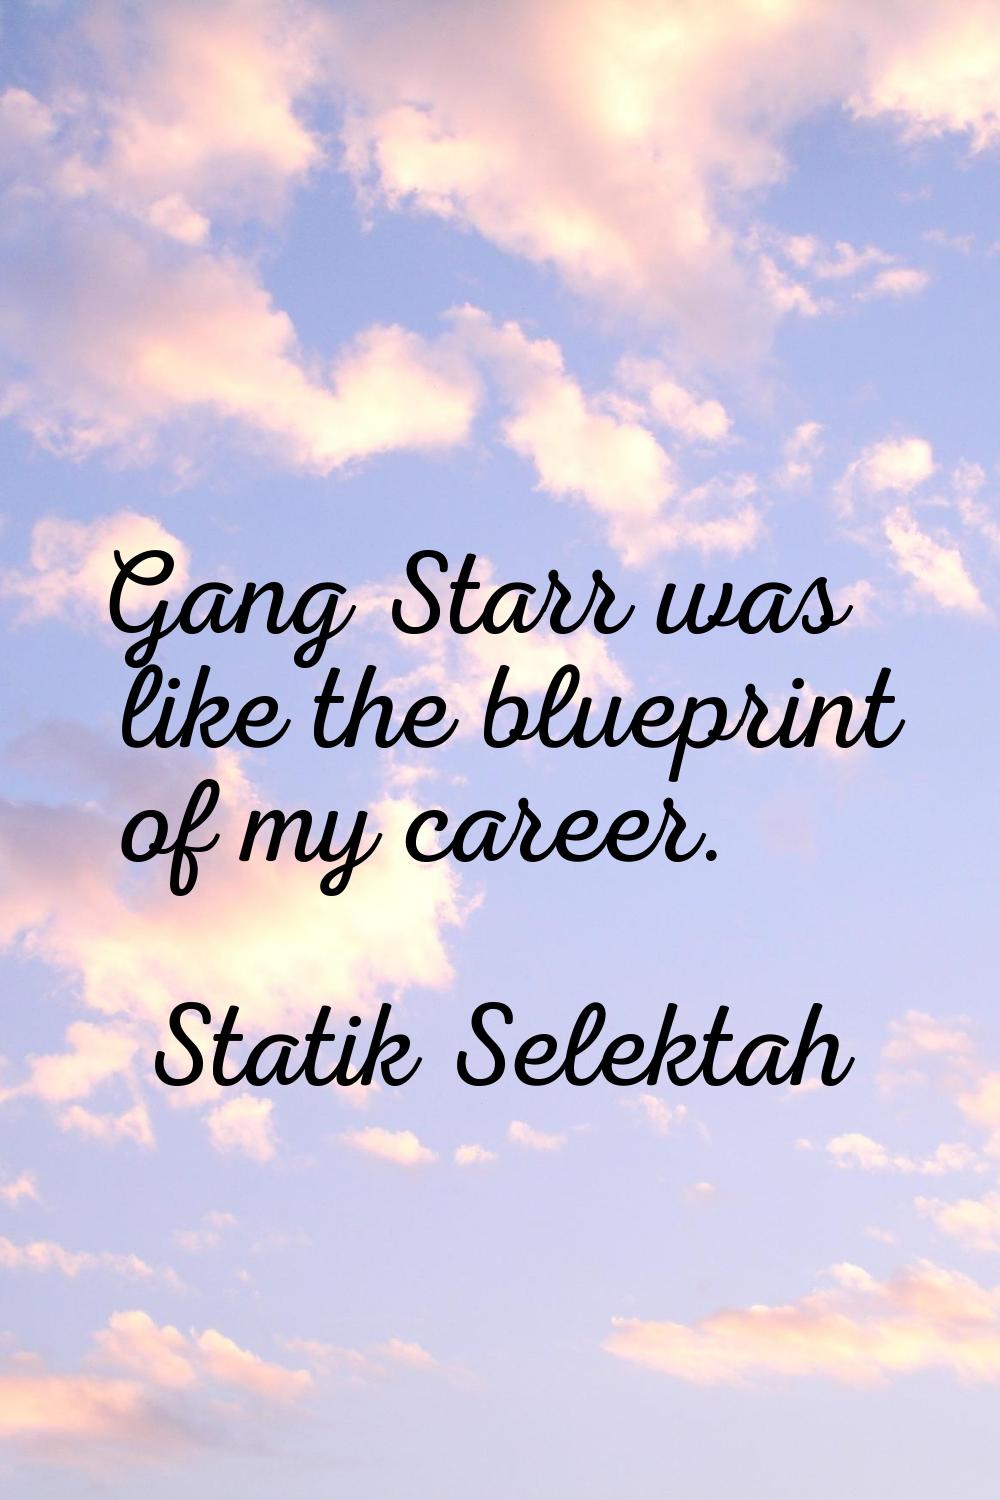 Gang Starr was like the blueprint of my career.